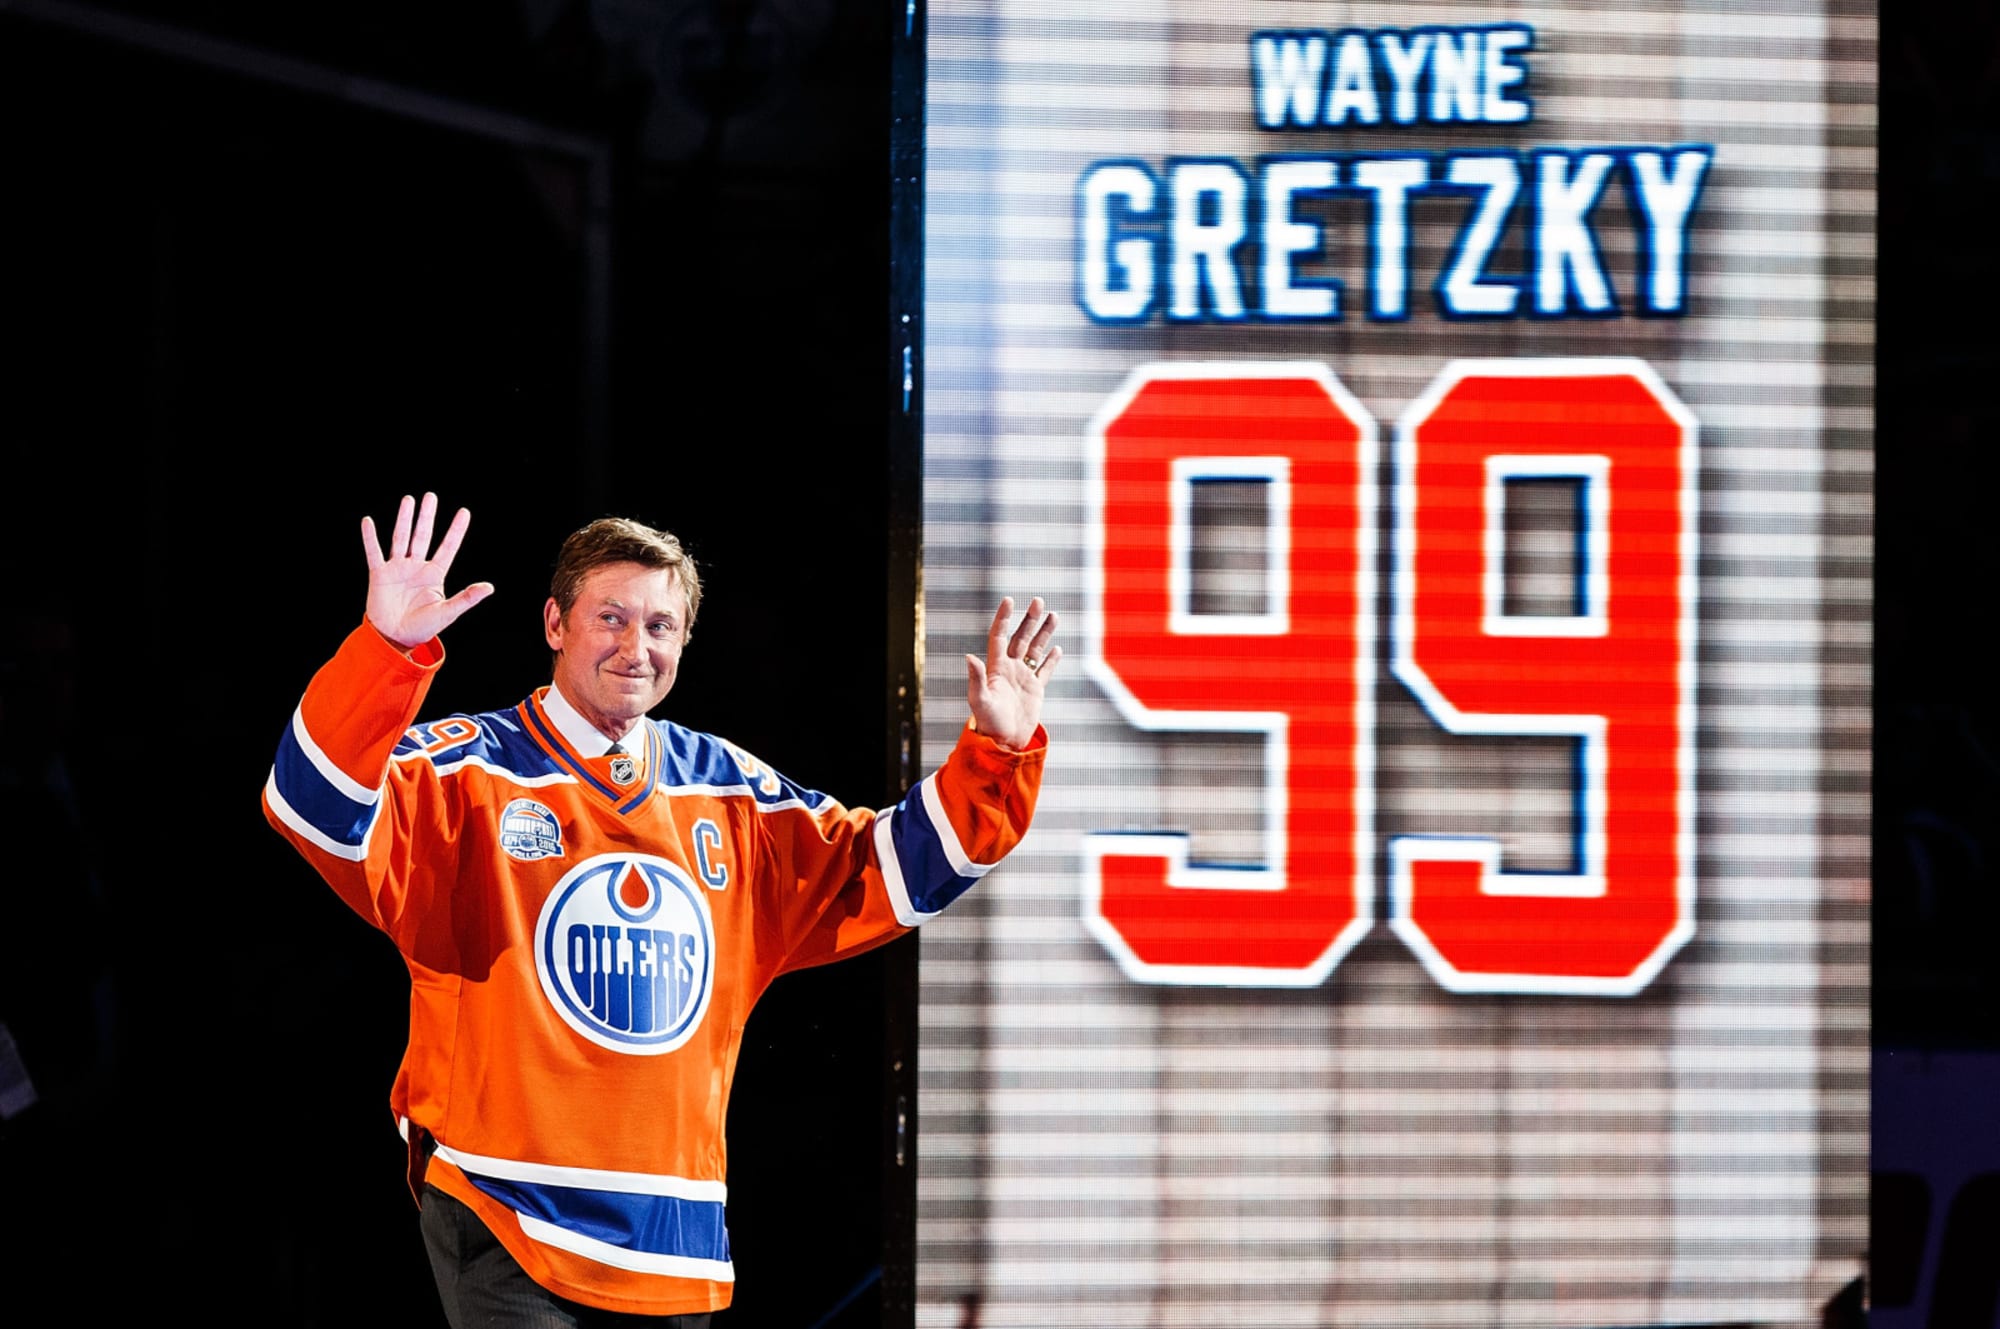 Wayne Gretzky by the numbers: A look at 'The Great One's' NHL career